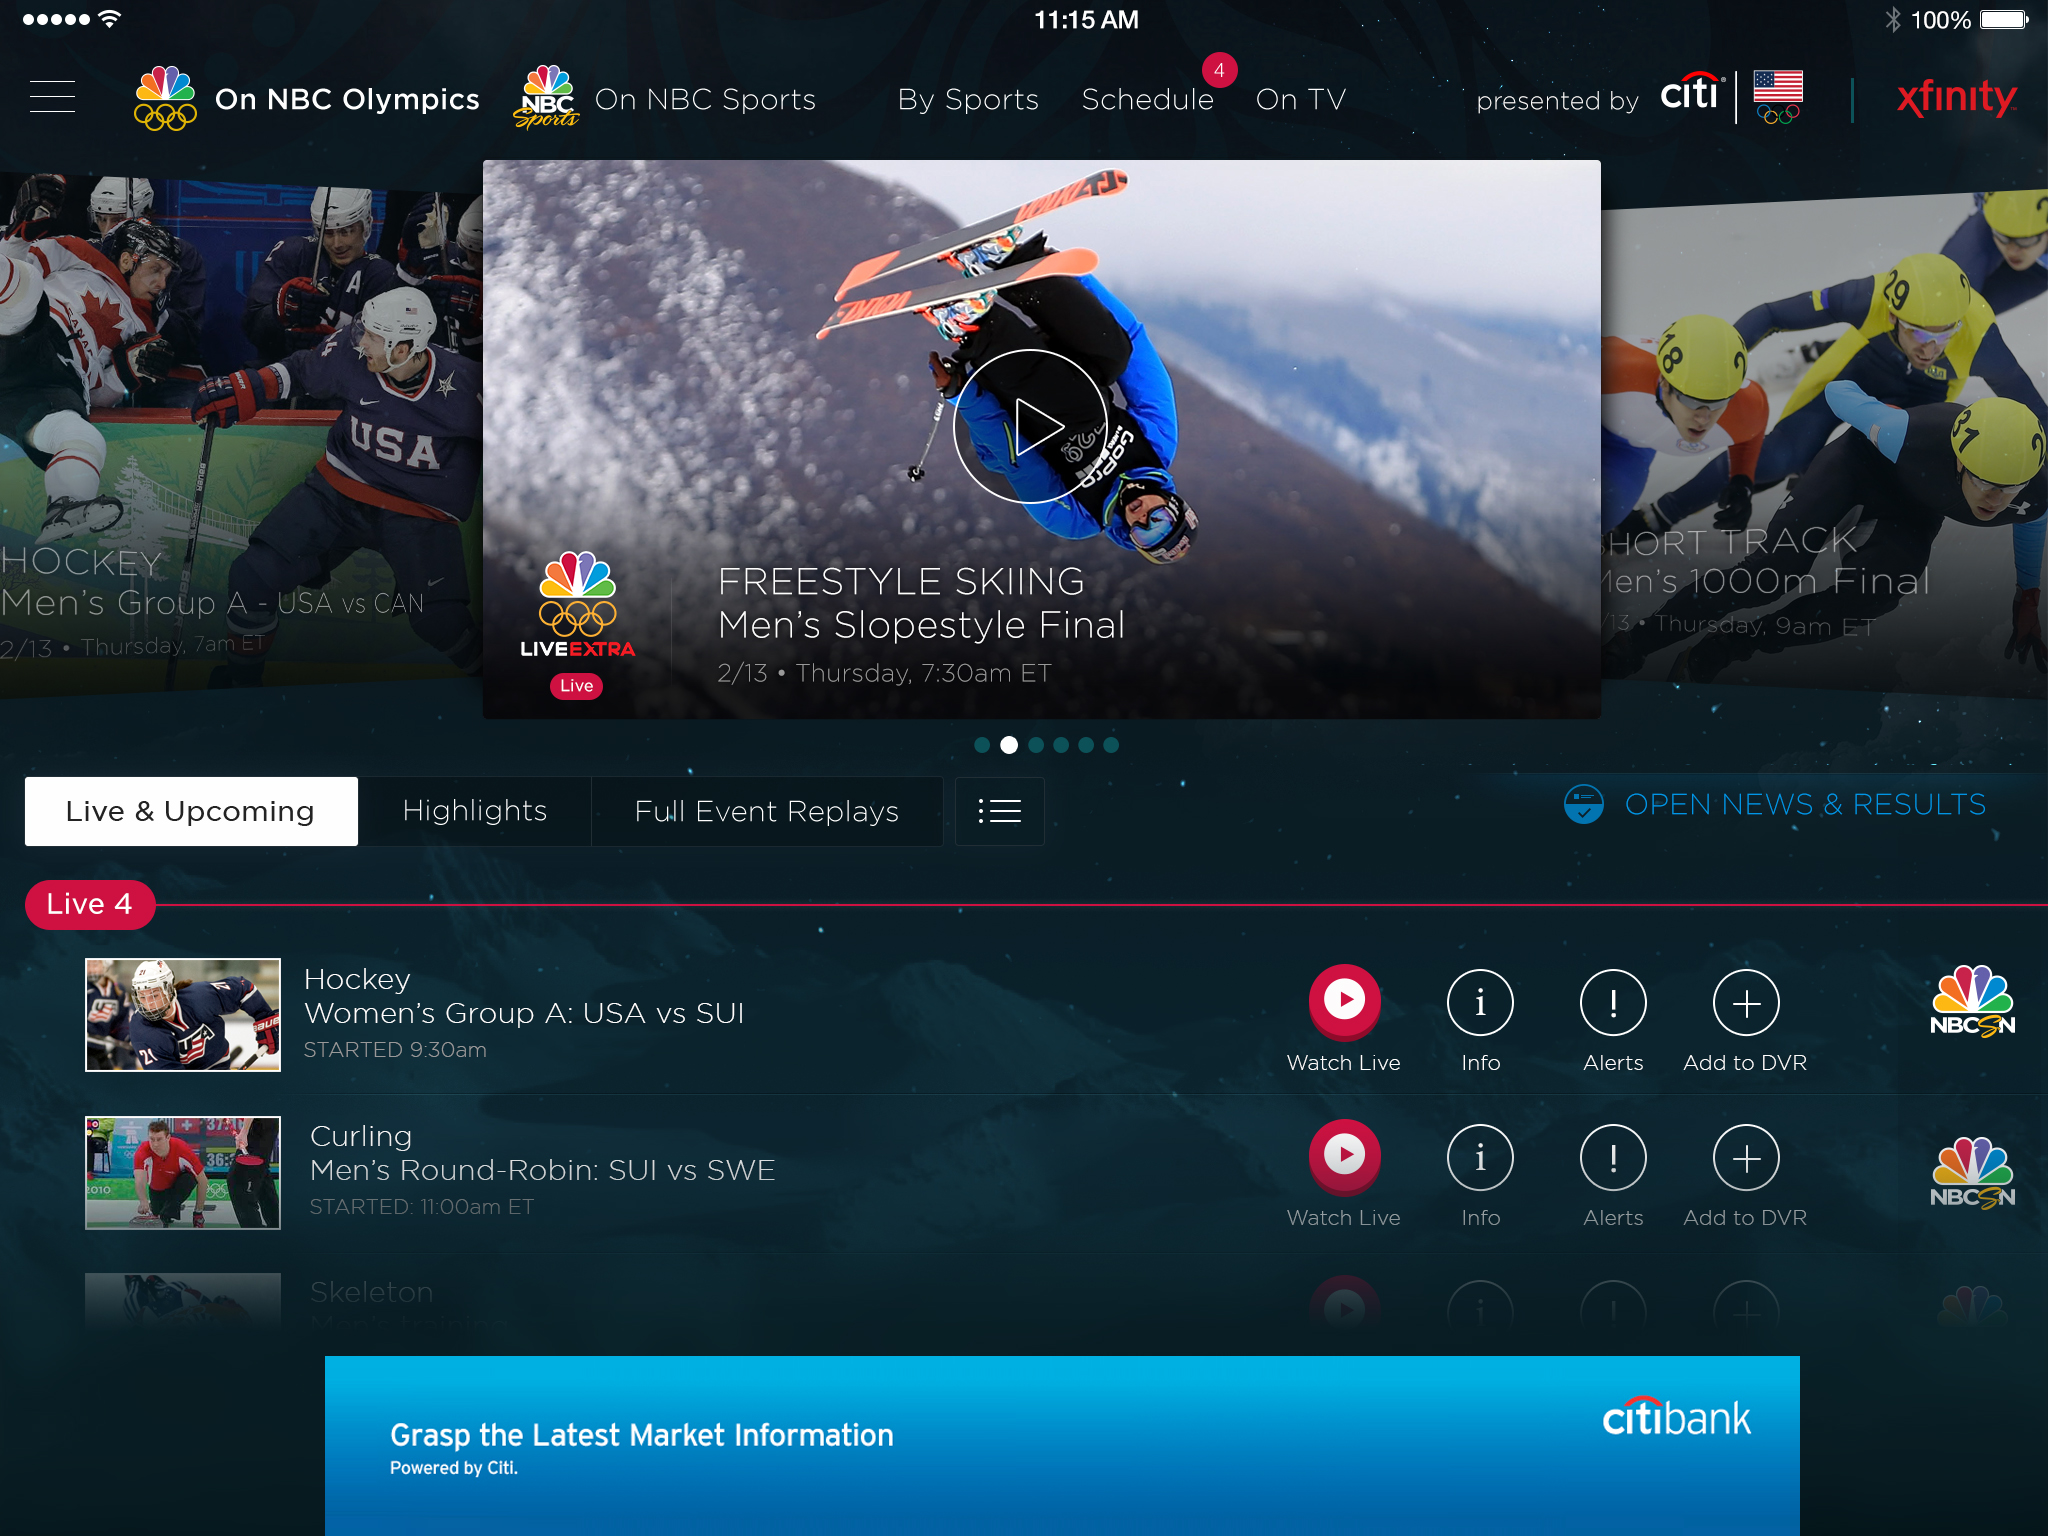 NBC Sports Live Extra App on Tablet